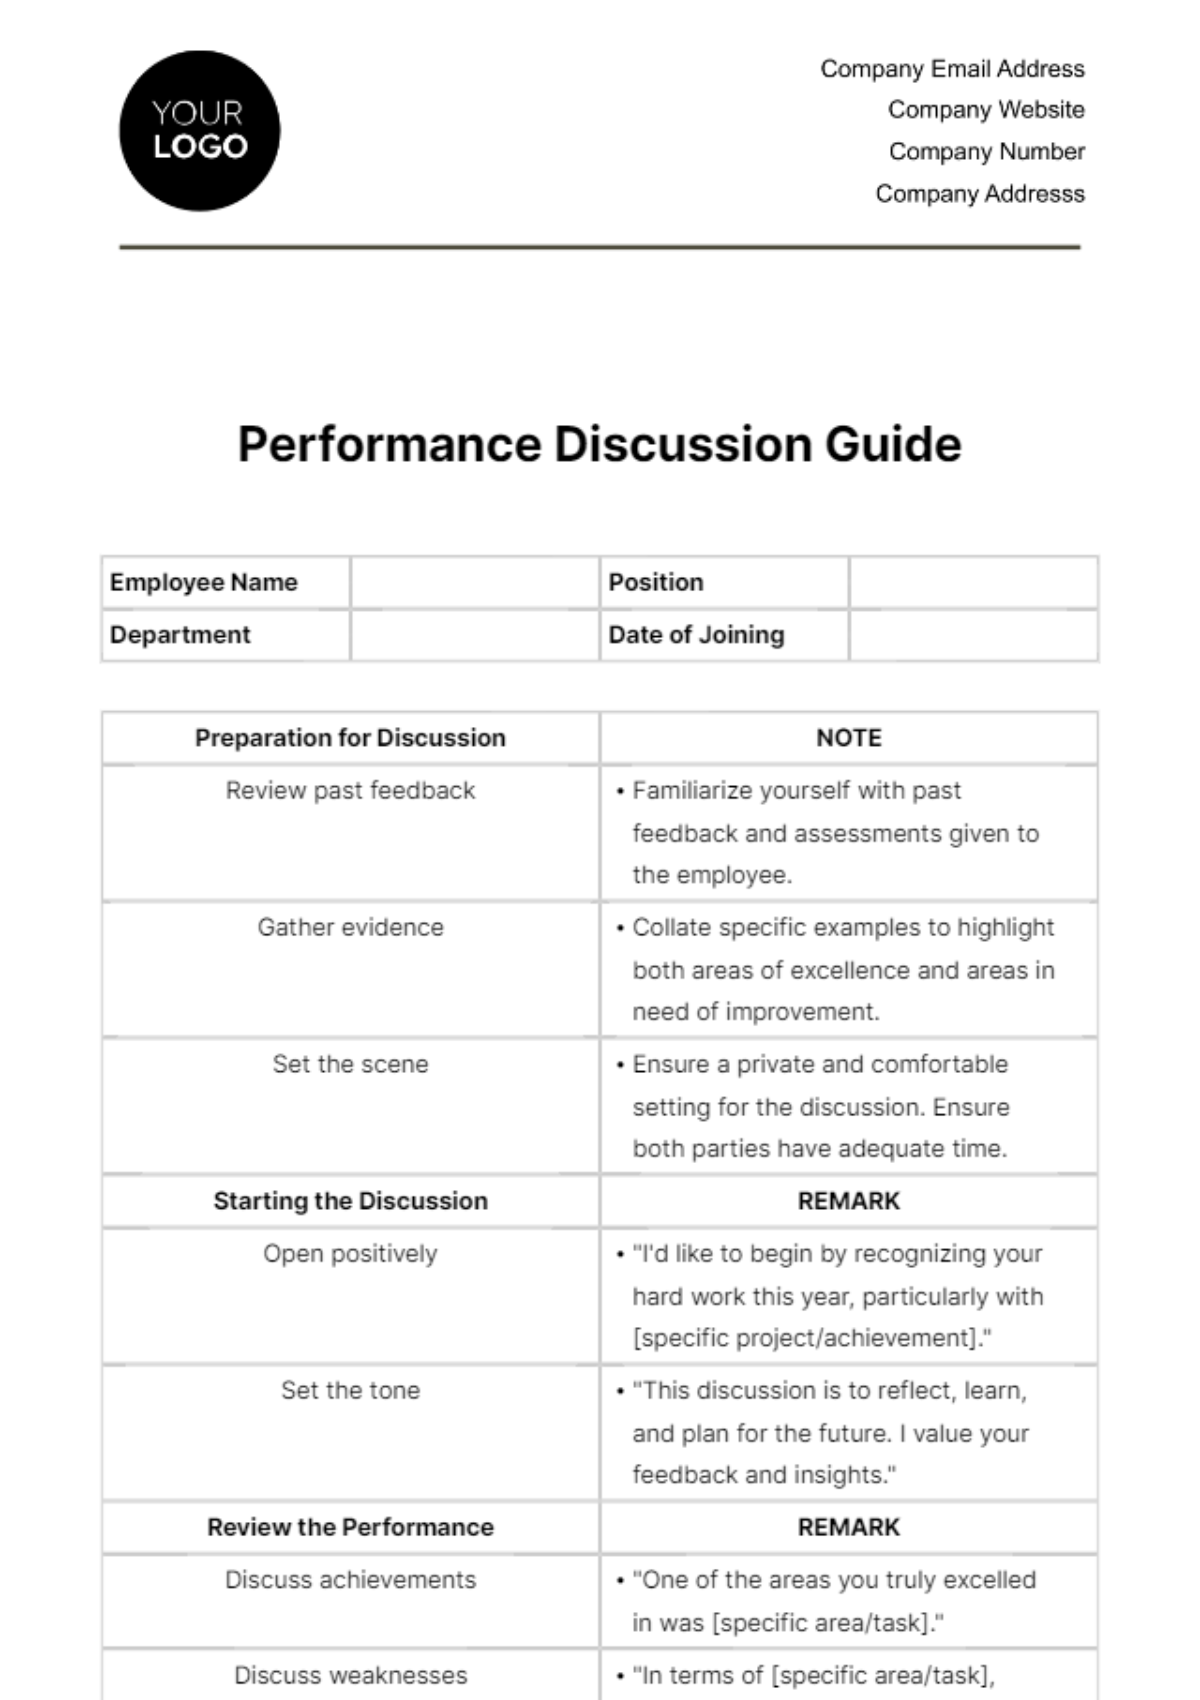 Performance Discussion Guide HR Template